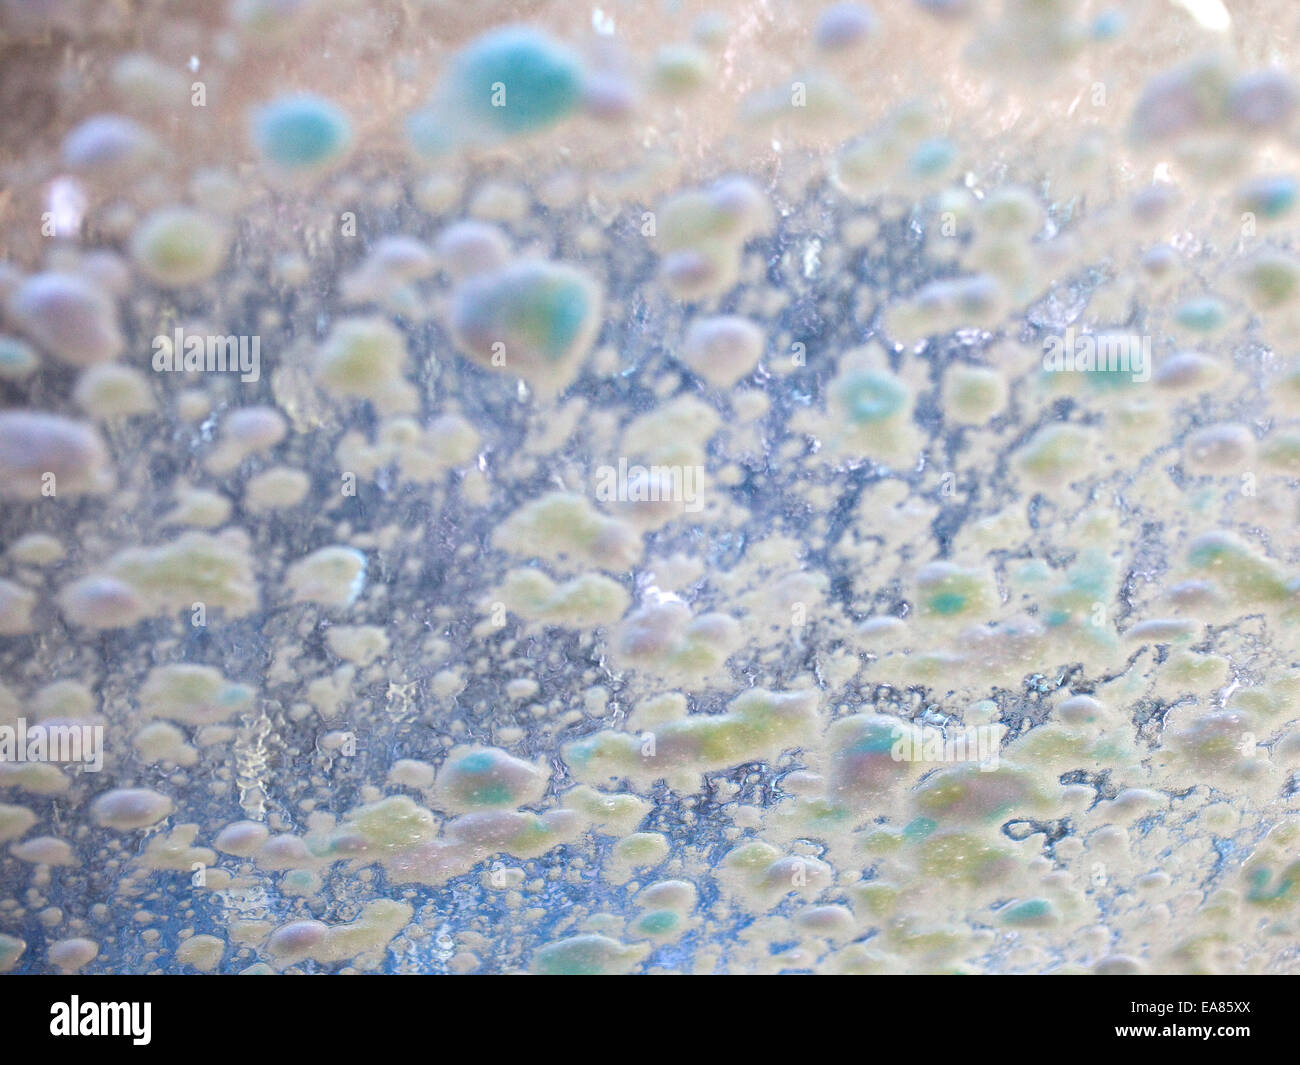 Soap suds on windshield of car going through car wash. Stock Photo